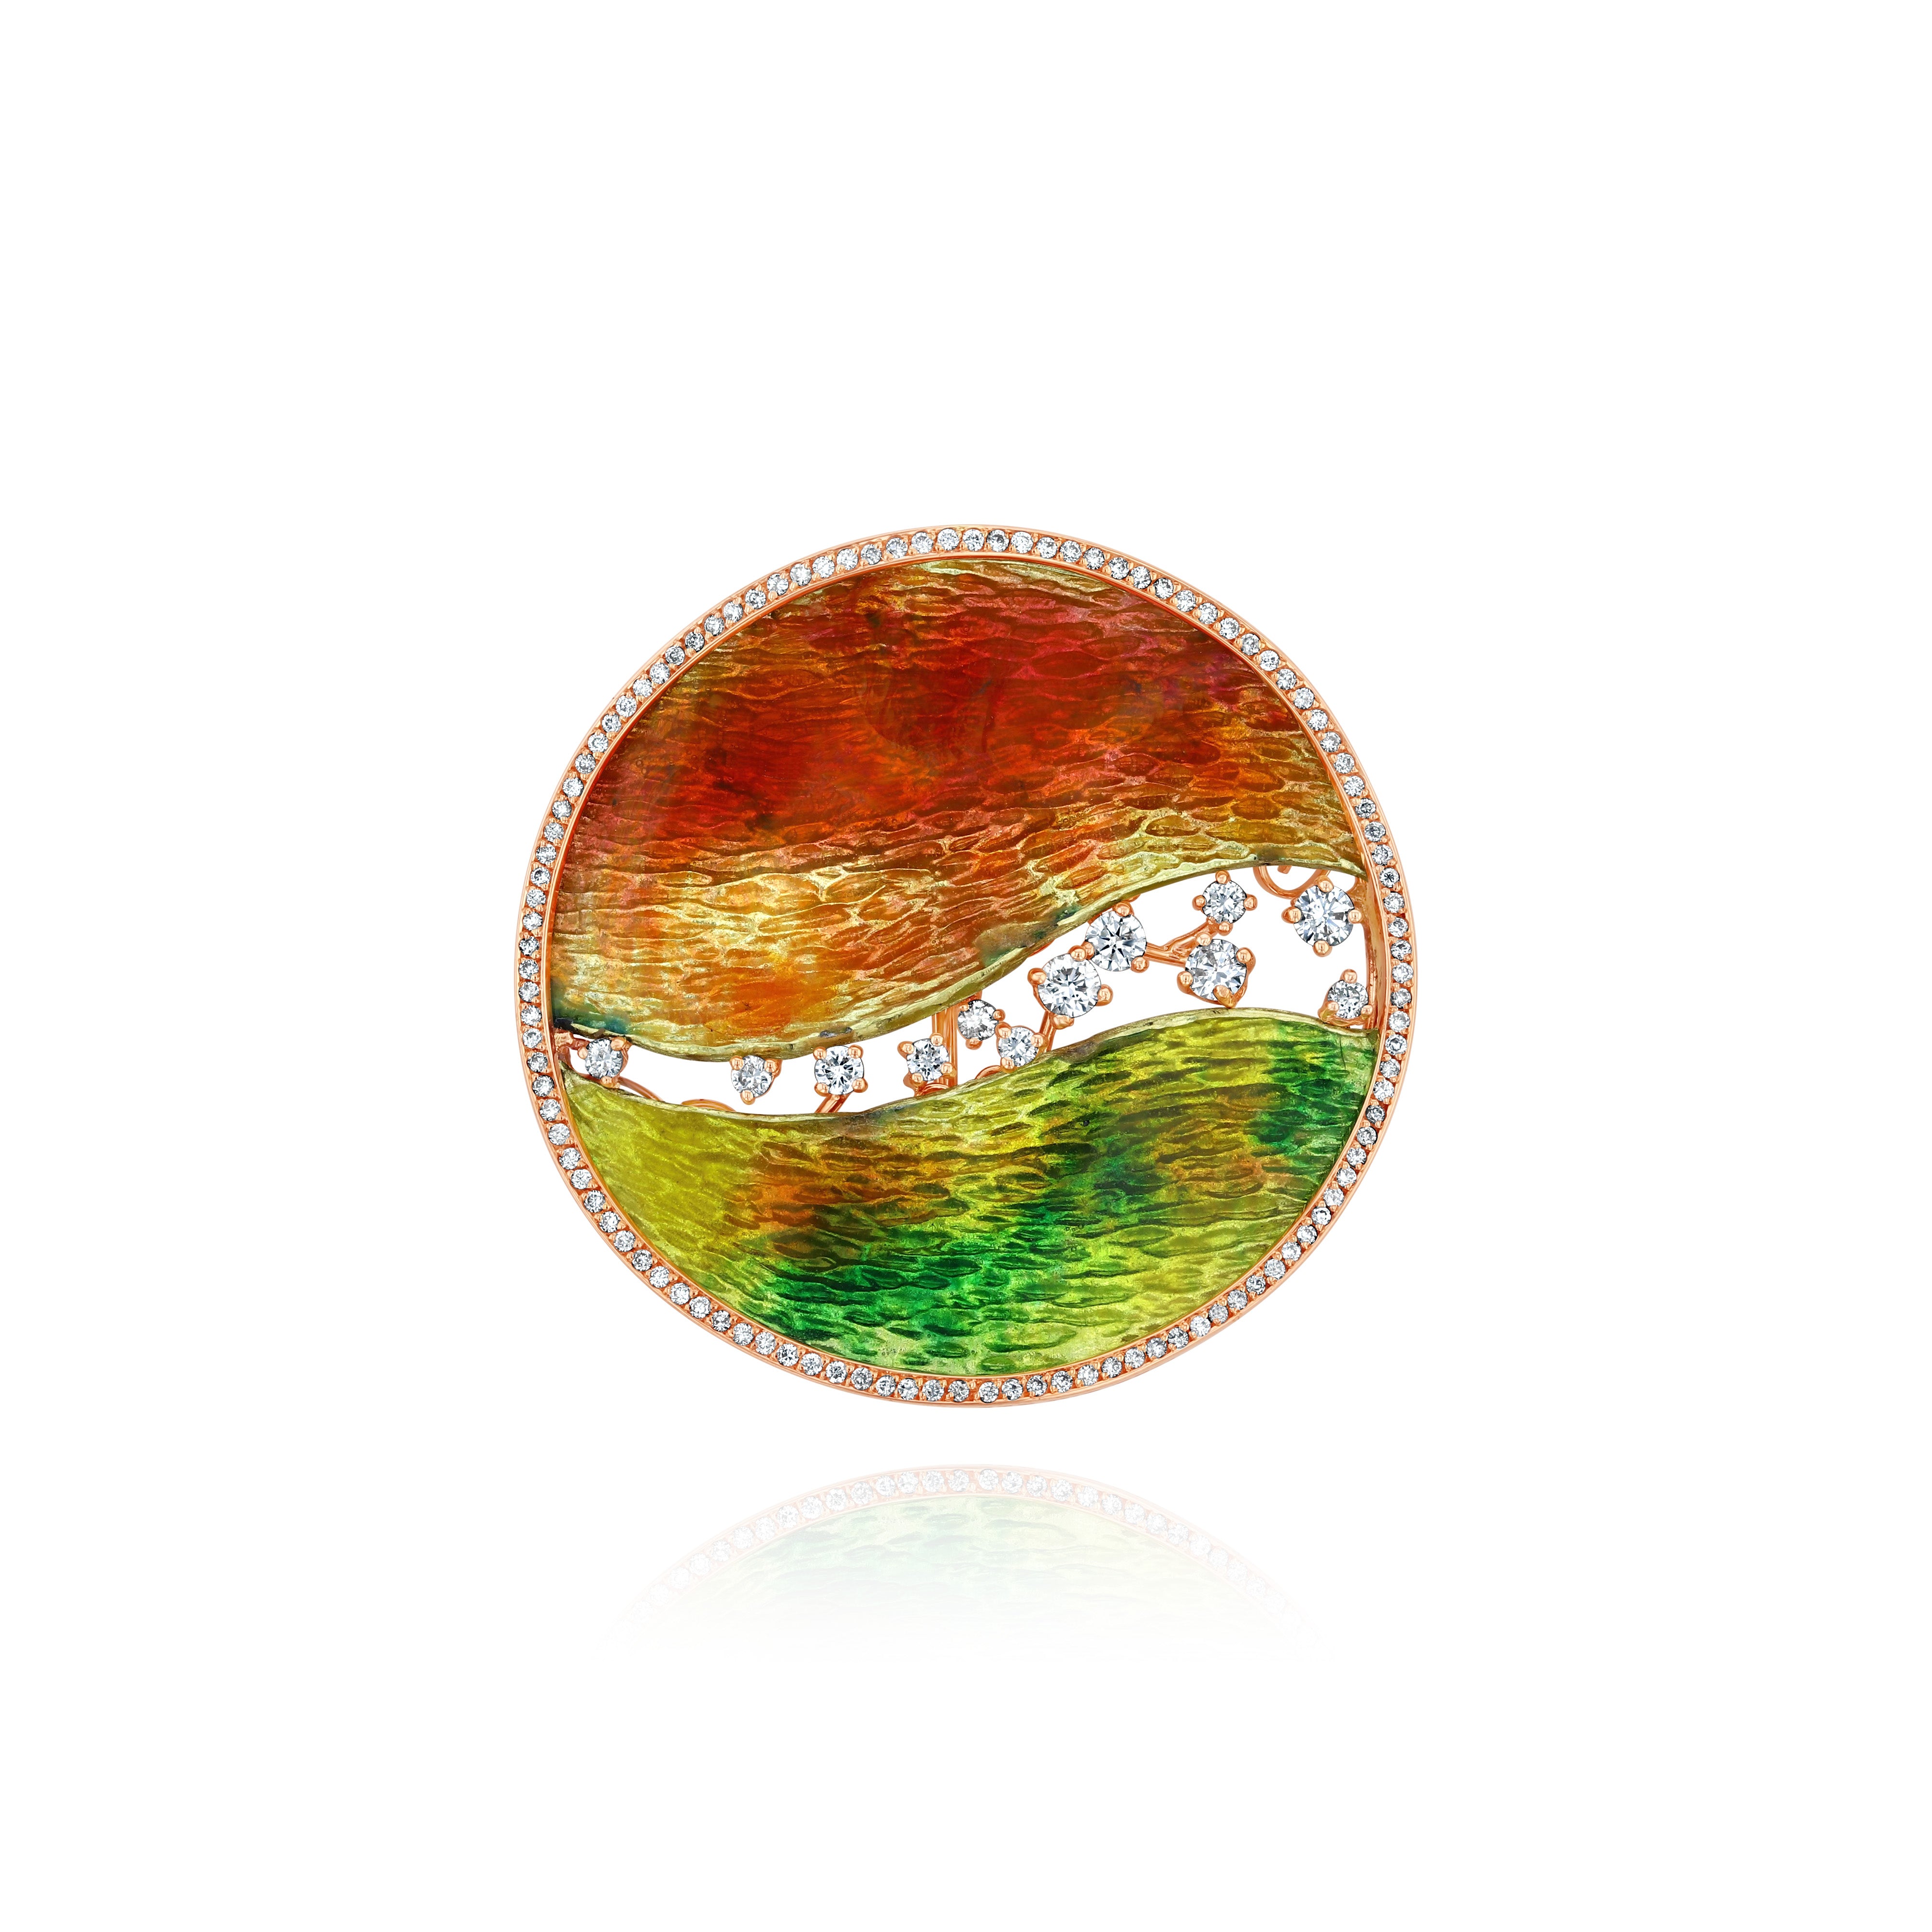 Round Rose Gold Brooch with Red, Orange, Yellow, and Green Cloisonne, and small Diamonds, Medium